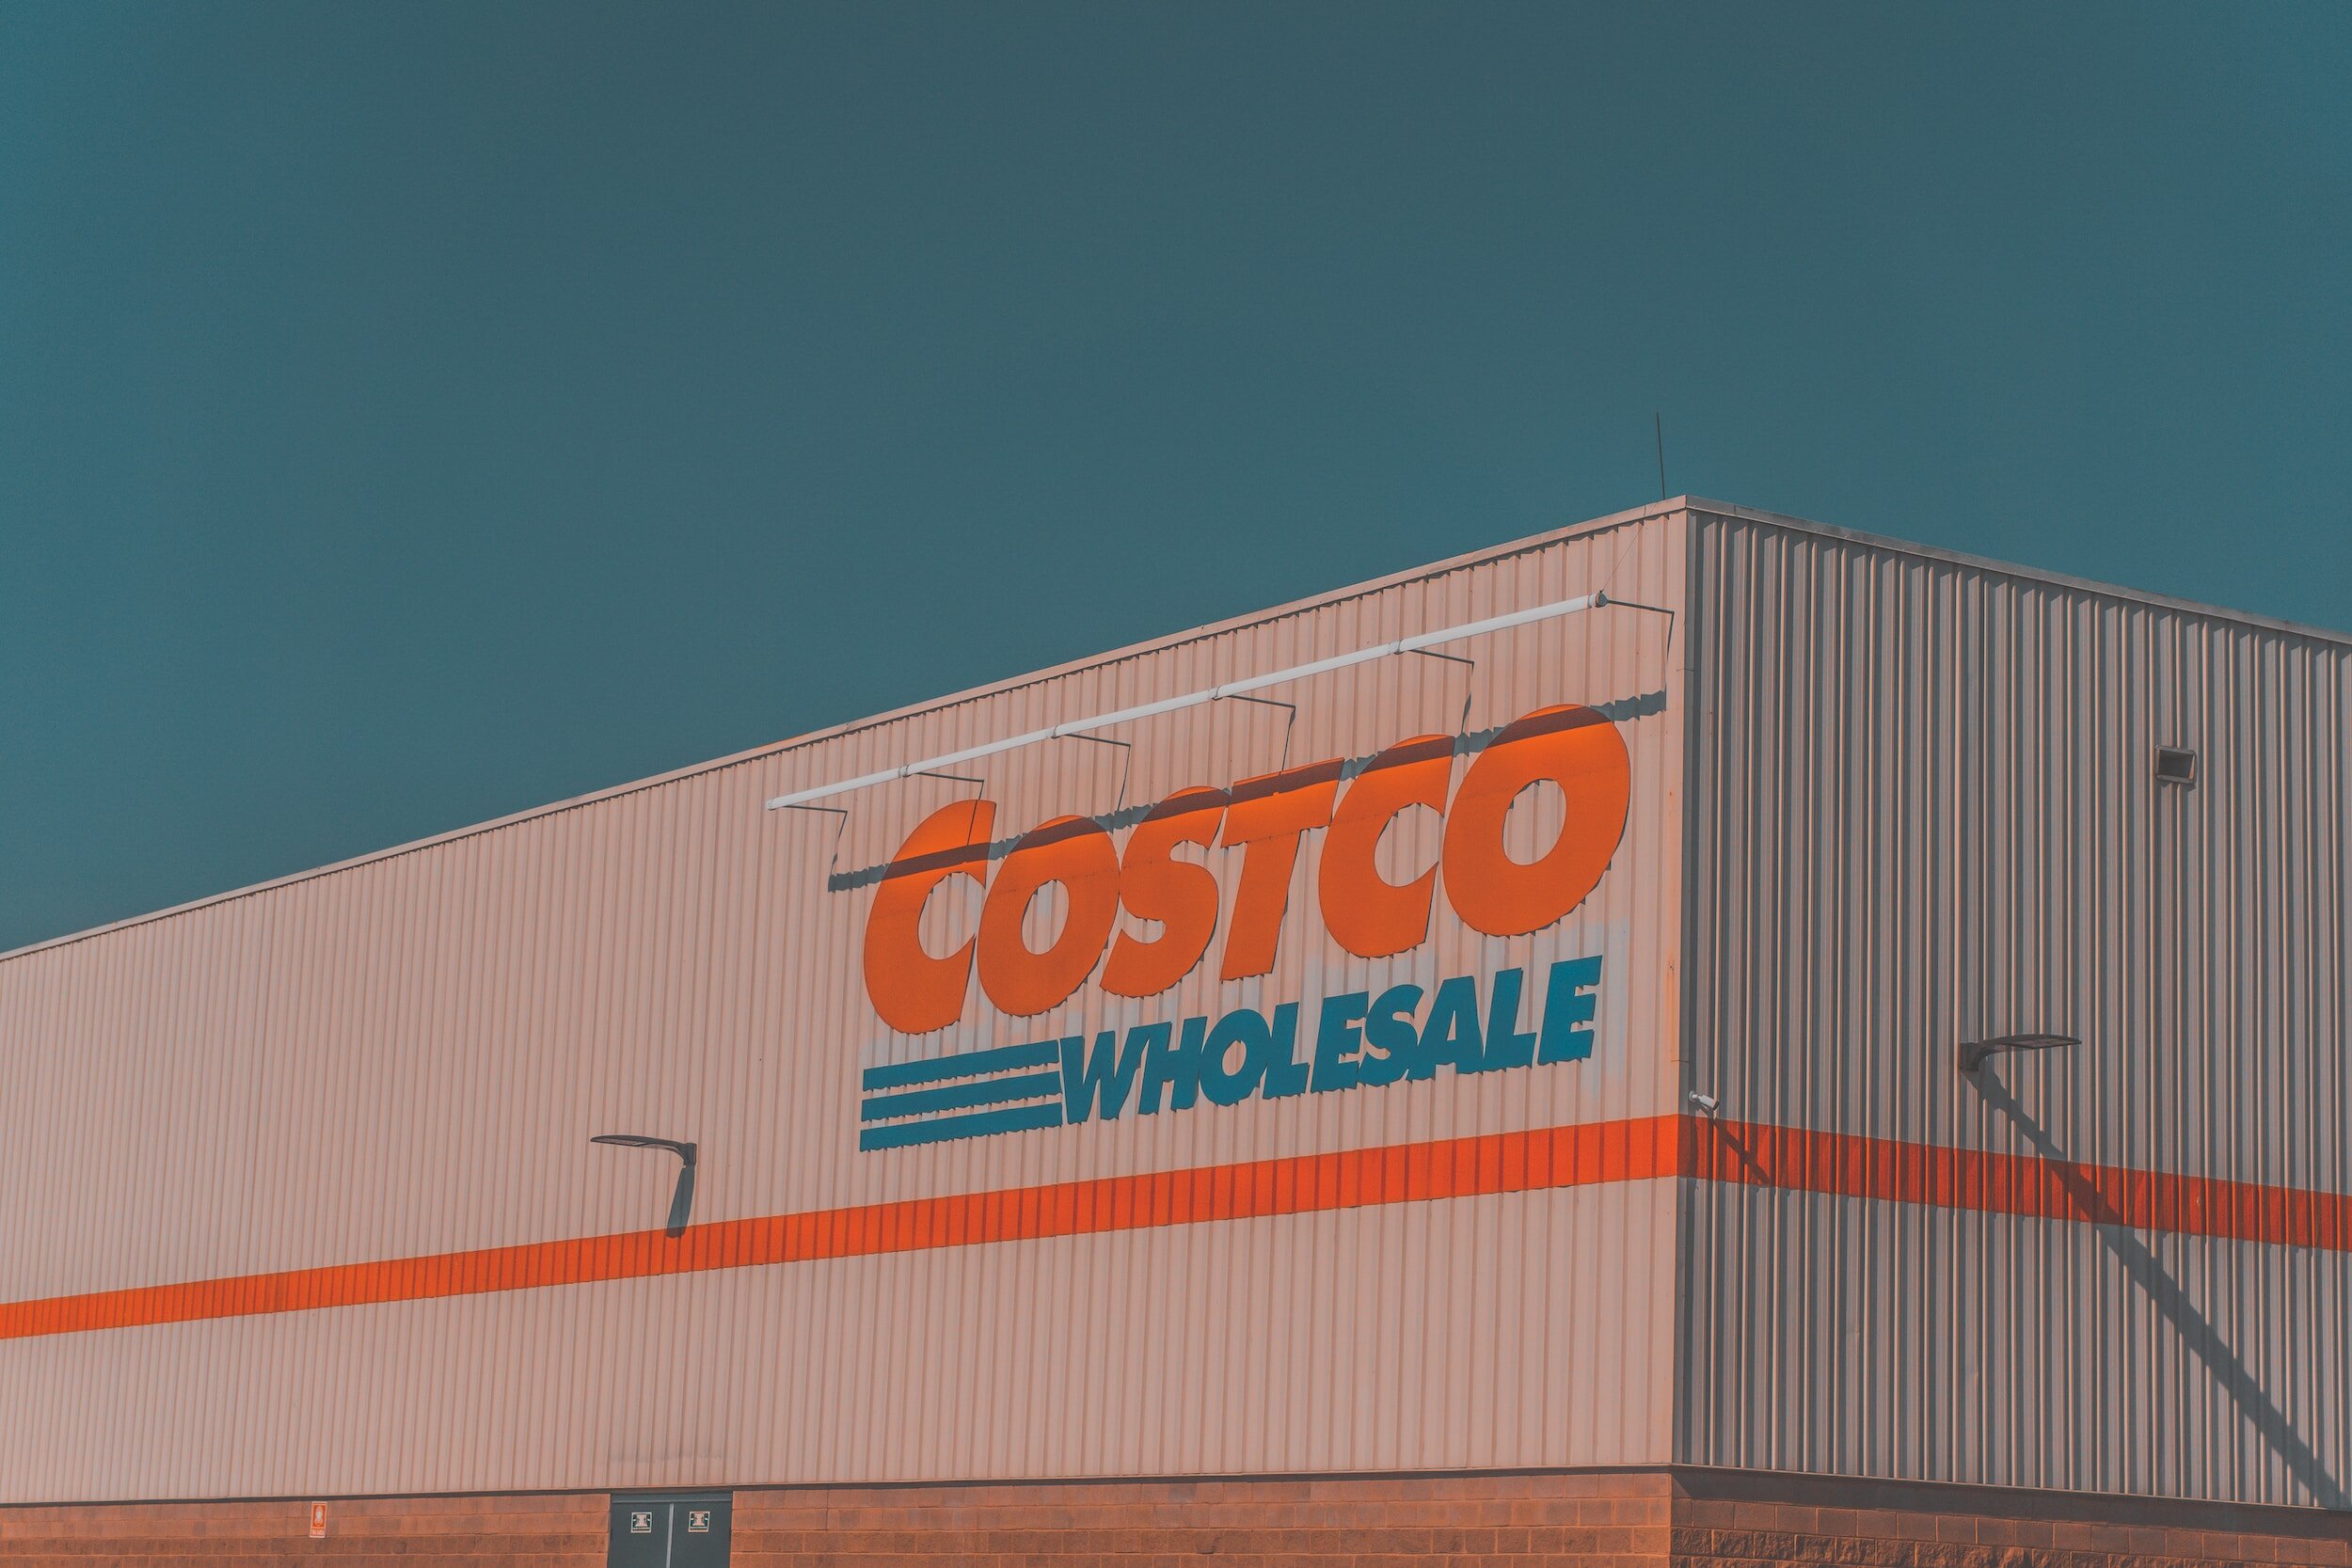 Costco Is Confronted With a More Serious Challenge Than Retail Theft and Inflation